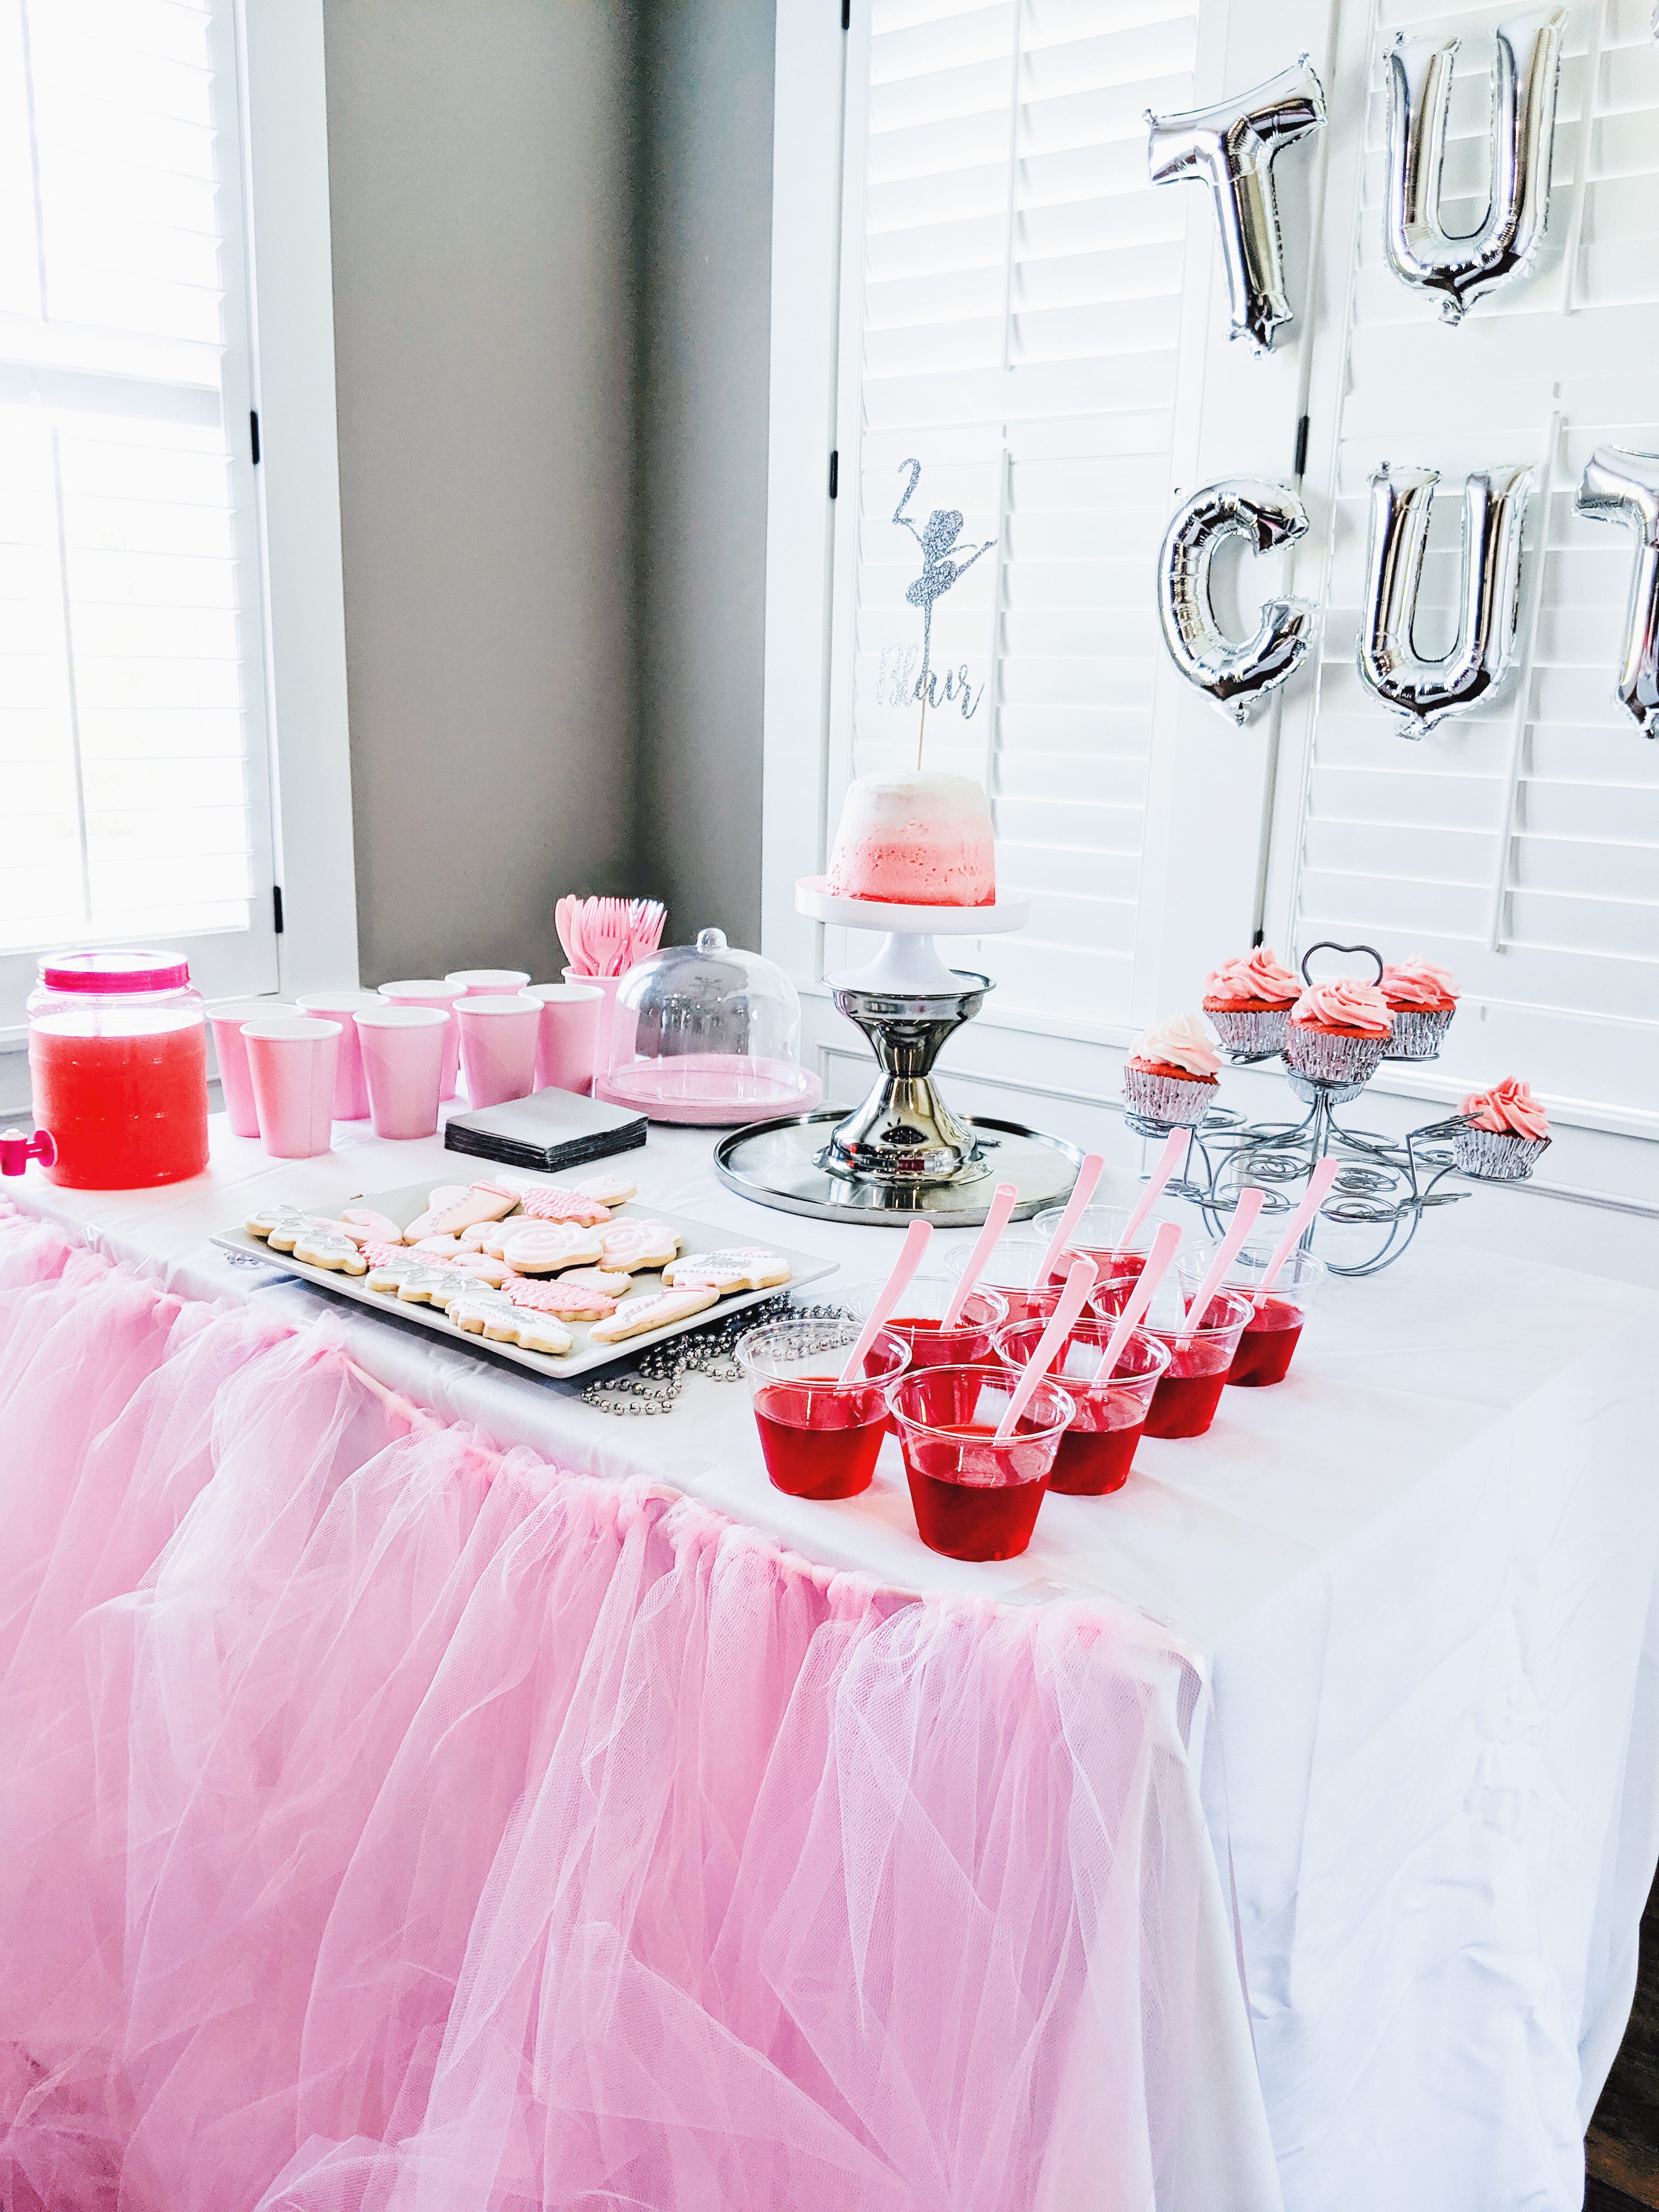 Tutu Cute Birthday Party - 2nd Birthday Party Ideas for Girls. This tutu cute party is perfect for your little dancer! Birthday party ideas for 2 year olds, pink birthday party, little girl birthday party. Two two cute. #tutucute #partyideas #2ndbirthday 